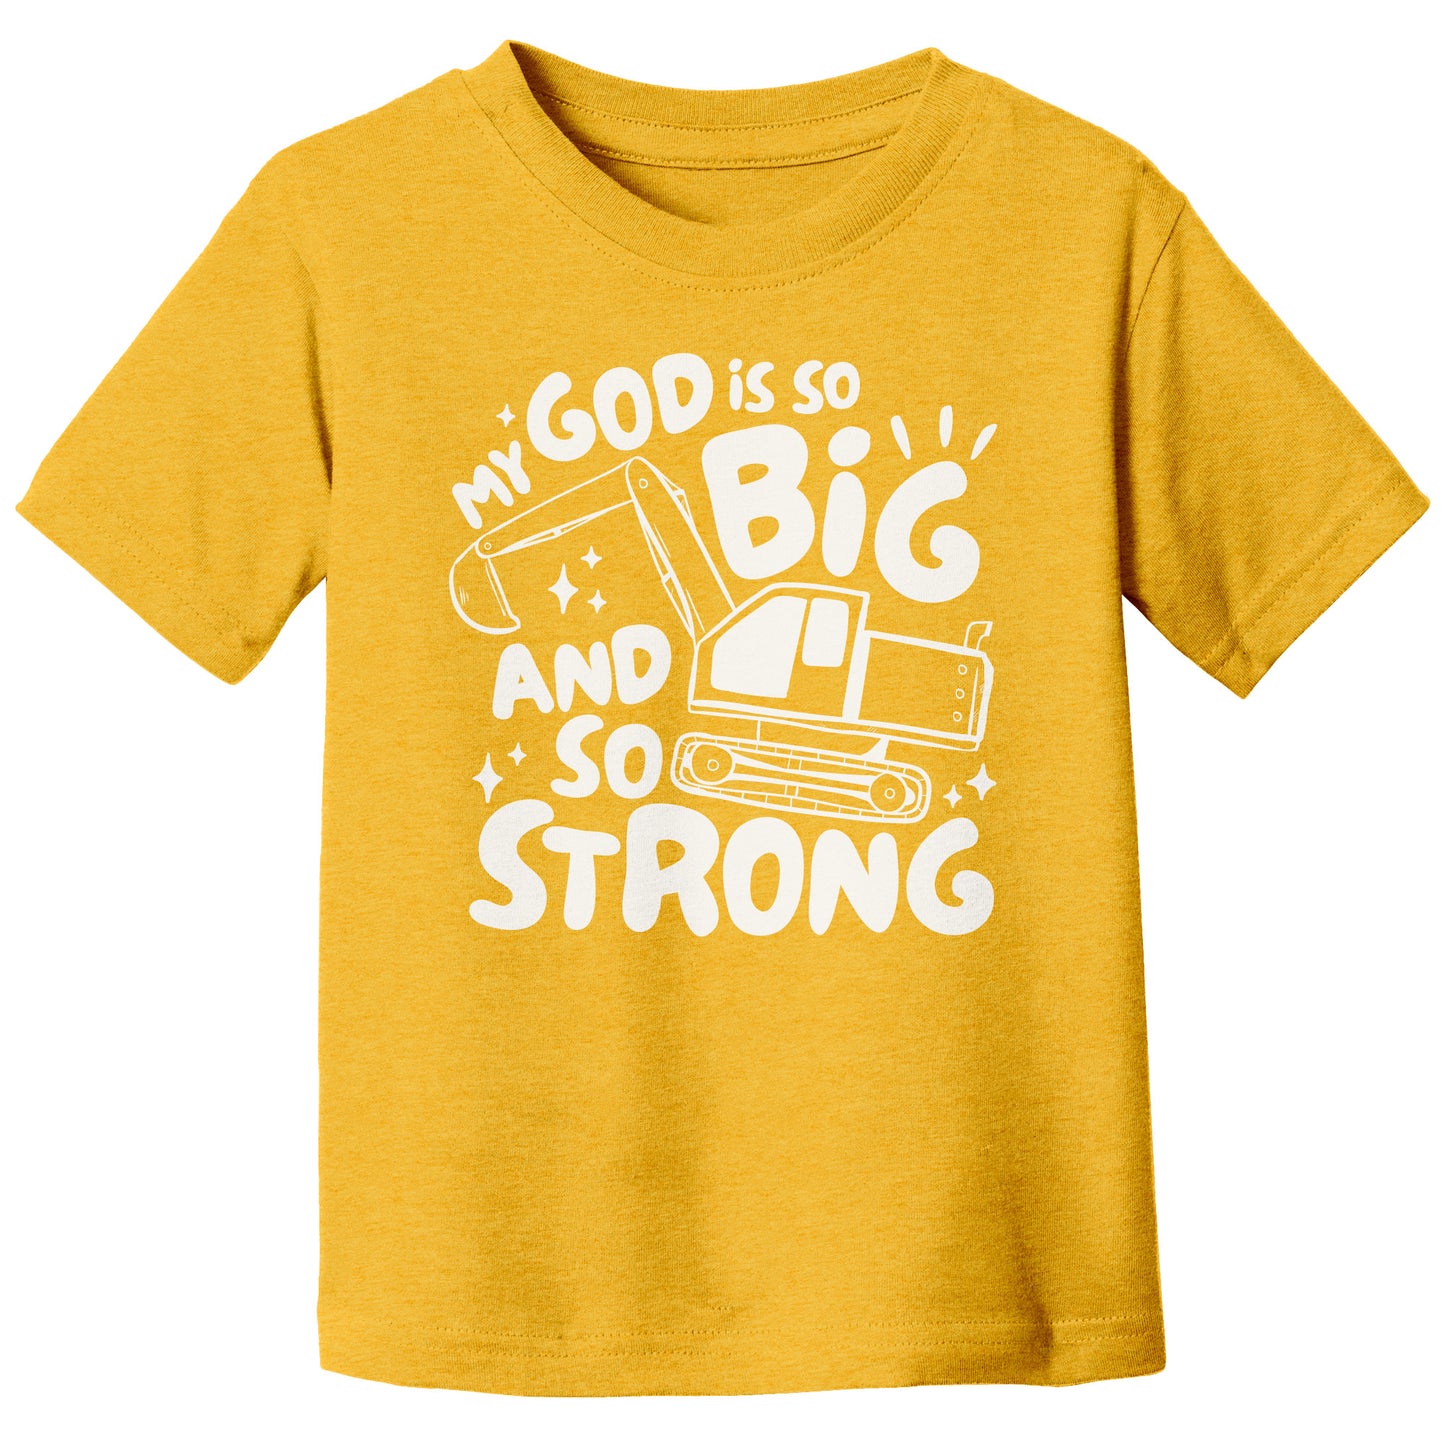 My God Is So Big And Strong Toddler T-Shirt